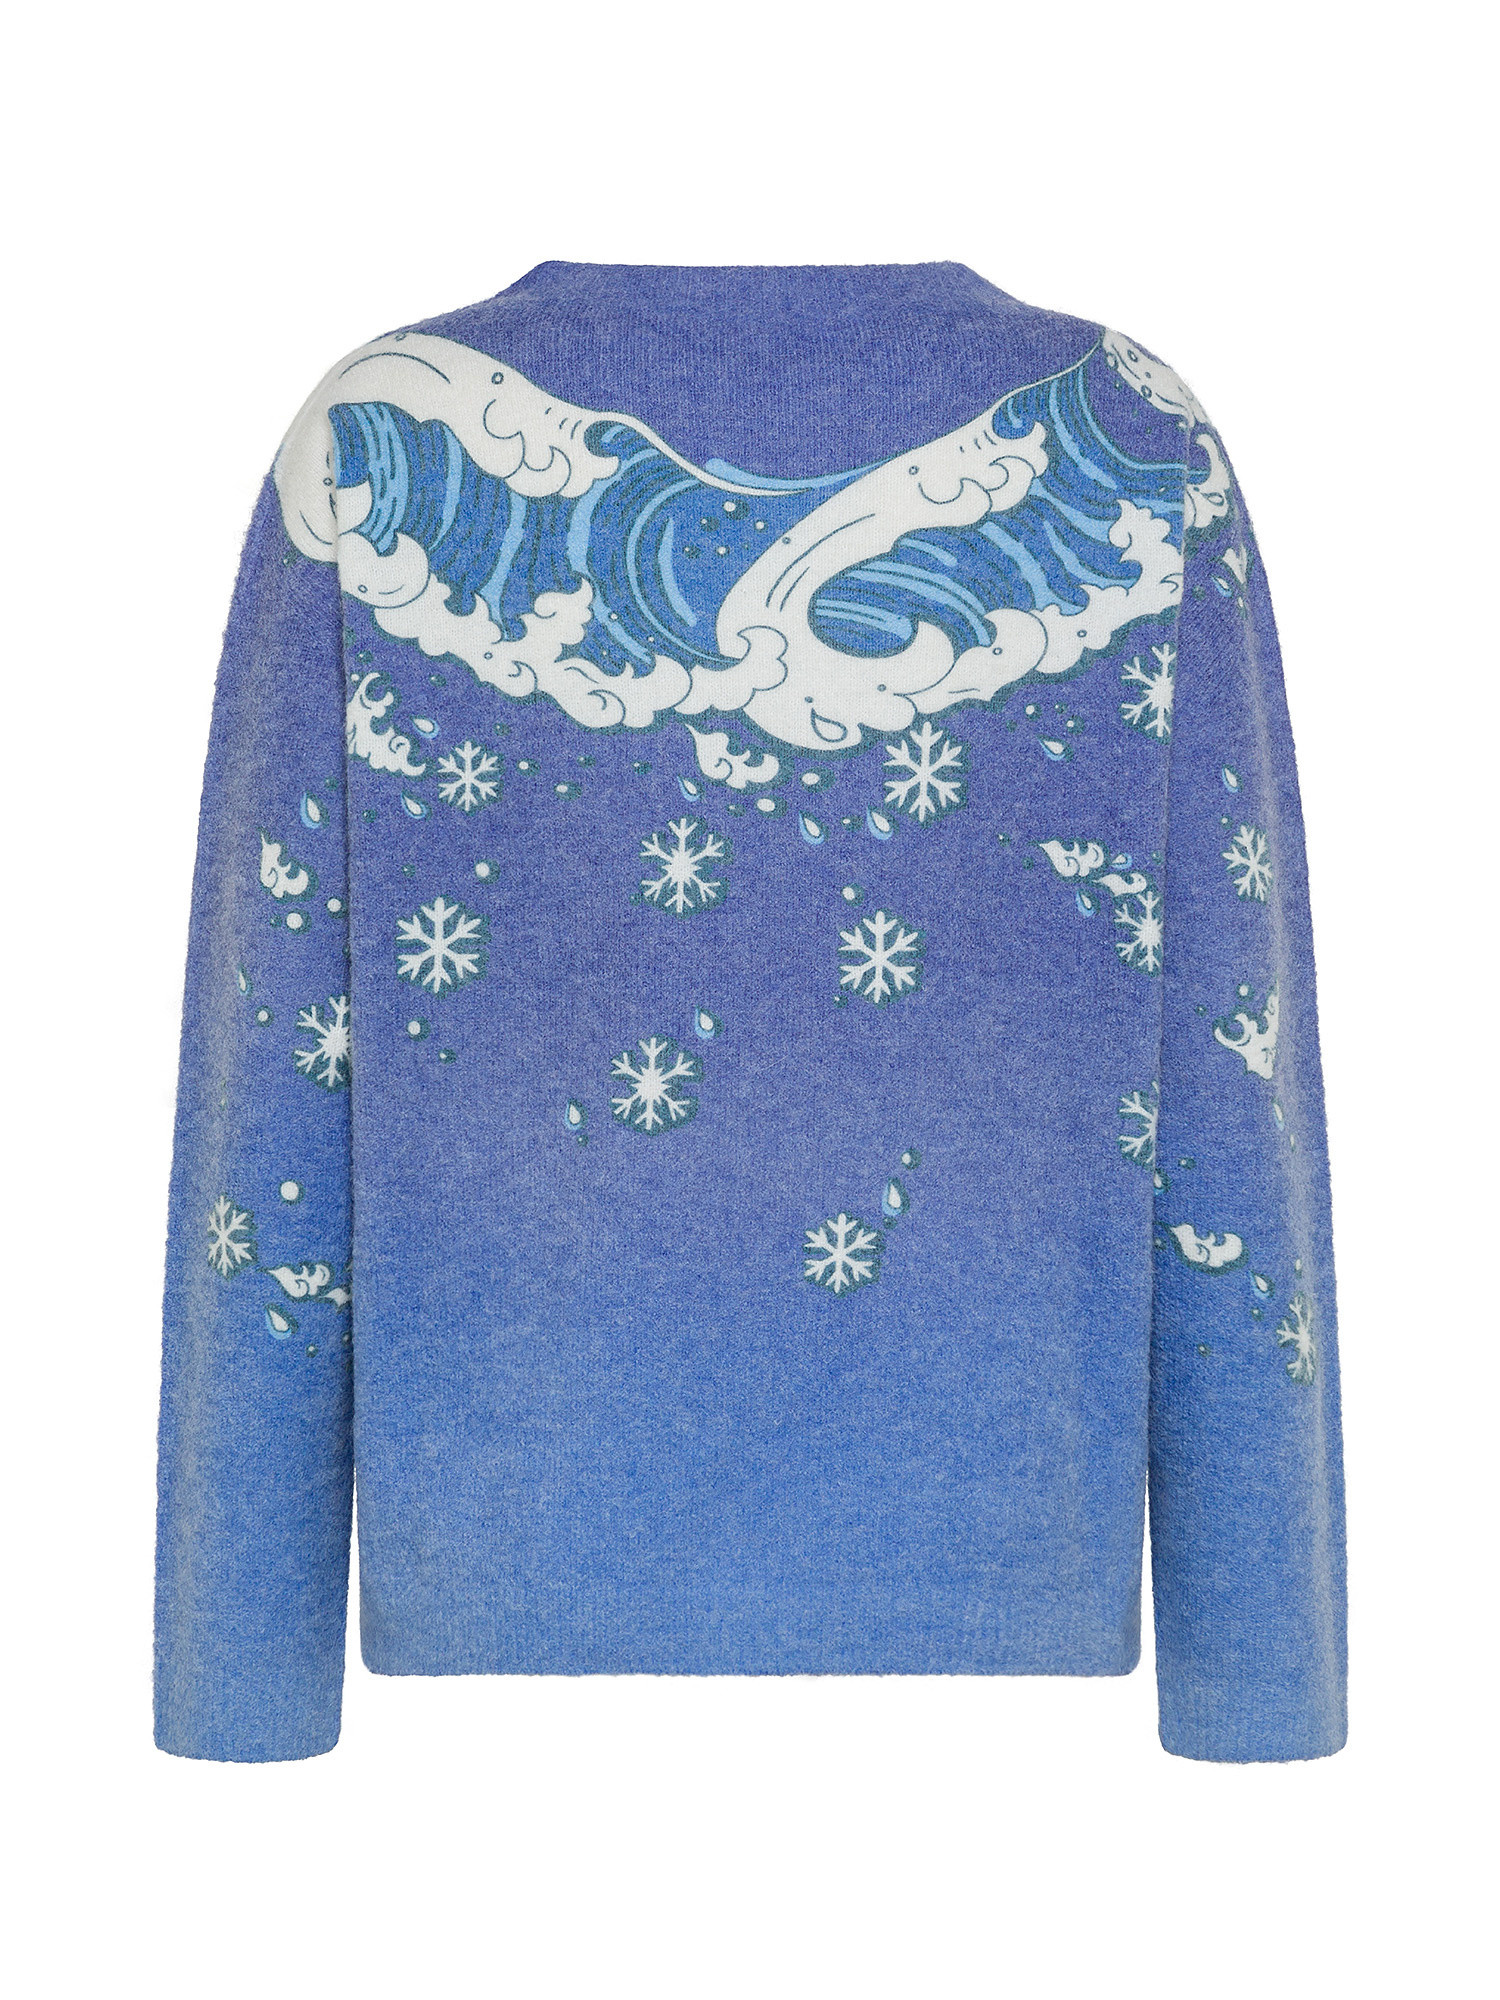 The Surfer's Christmas sweater by Paula Cademartori, Blue, large image number 1